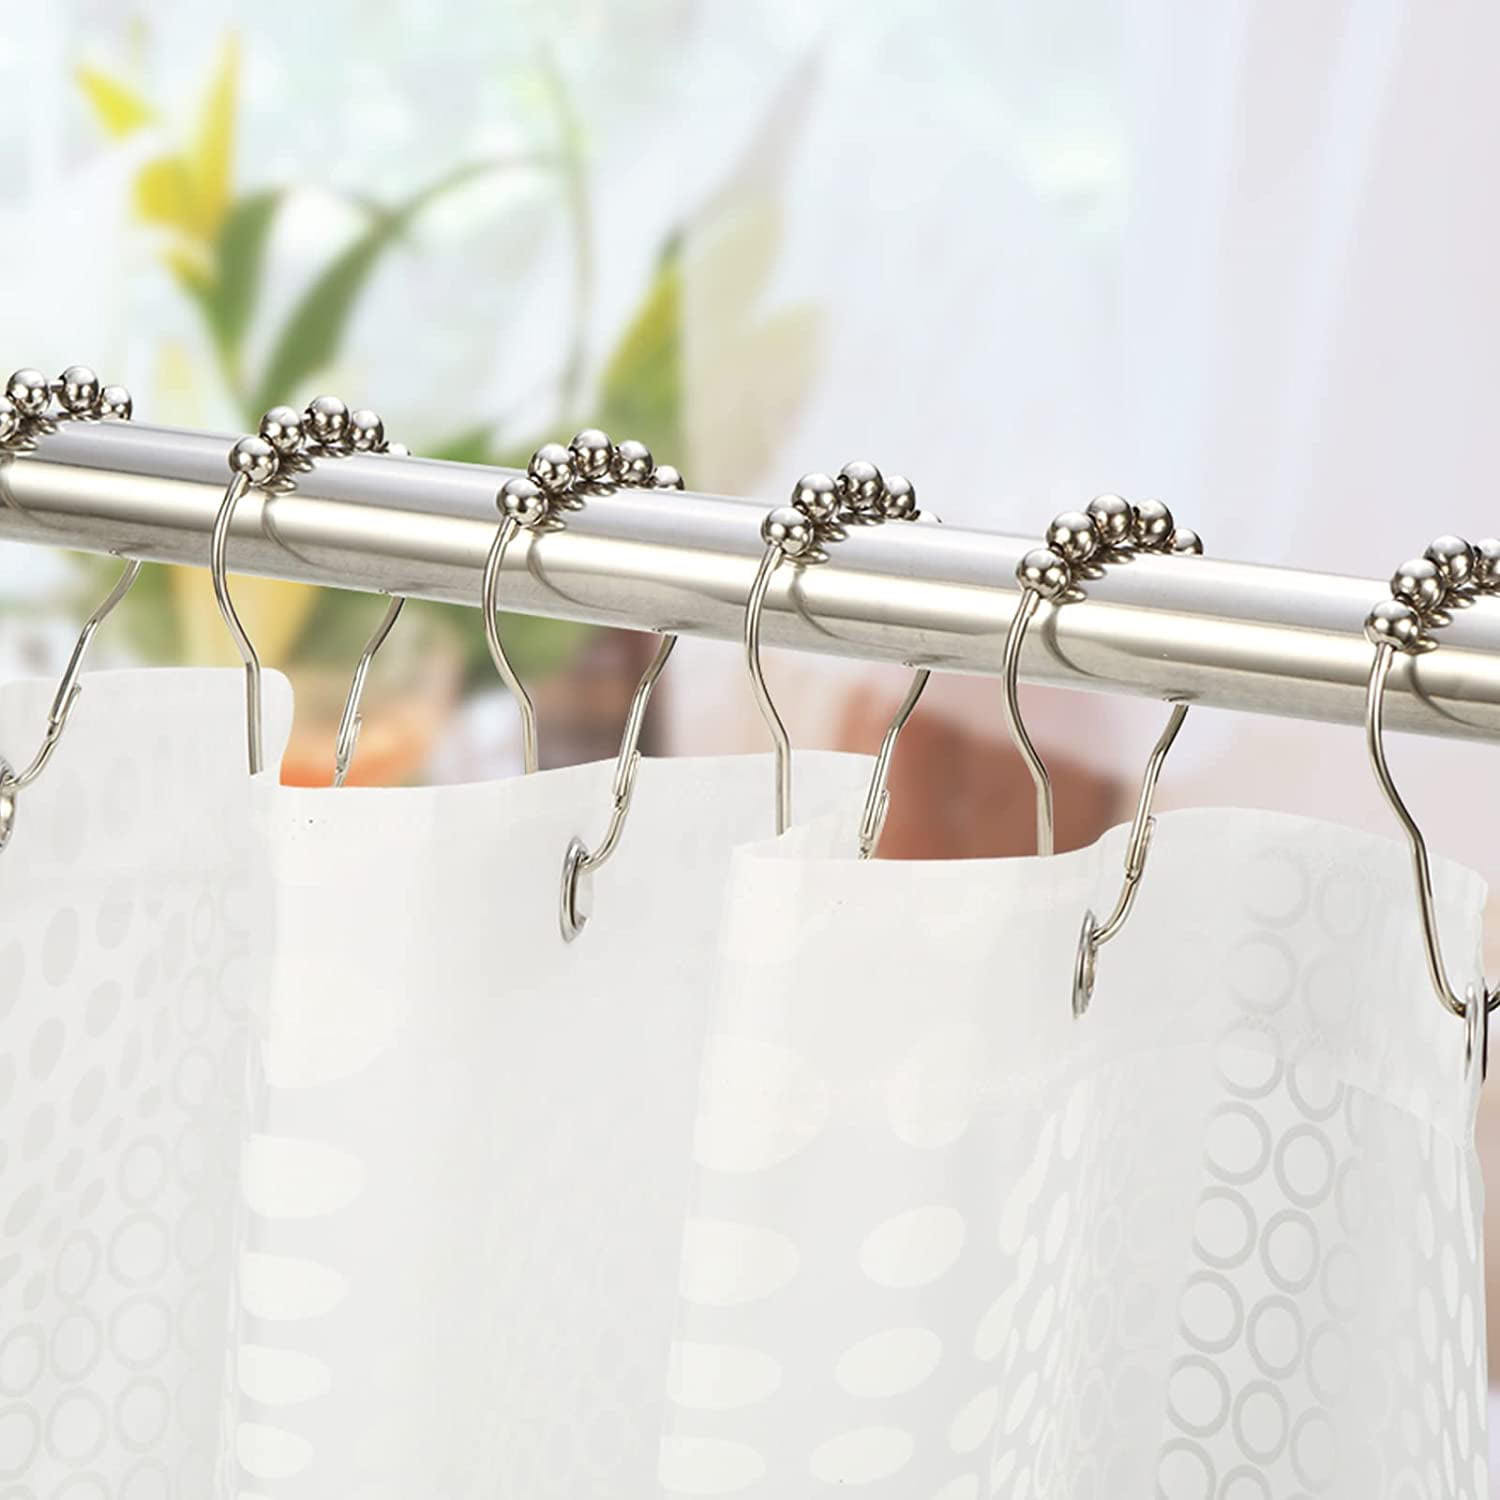 Goowin Shower Curtain Hooks, 12 Pcs Rings, Stainless Steel - Nickel